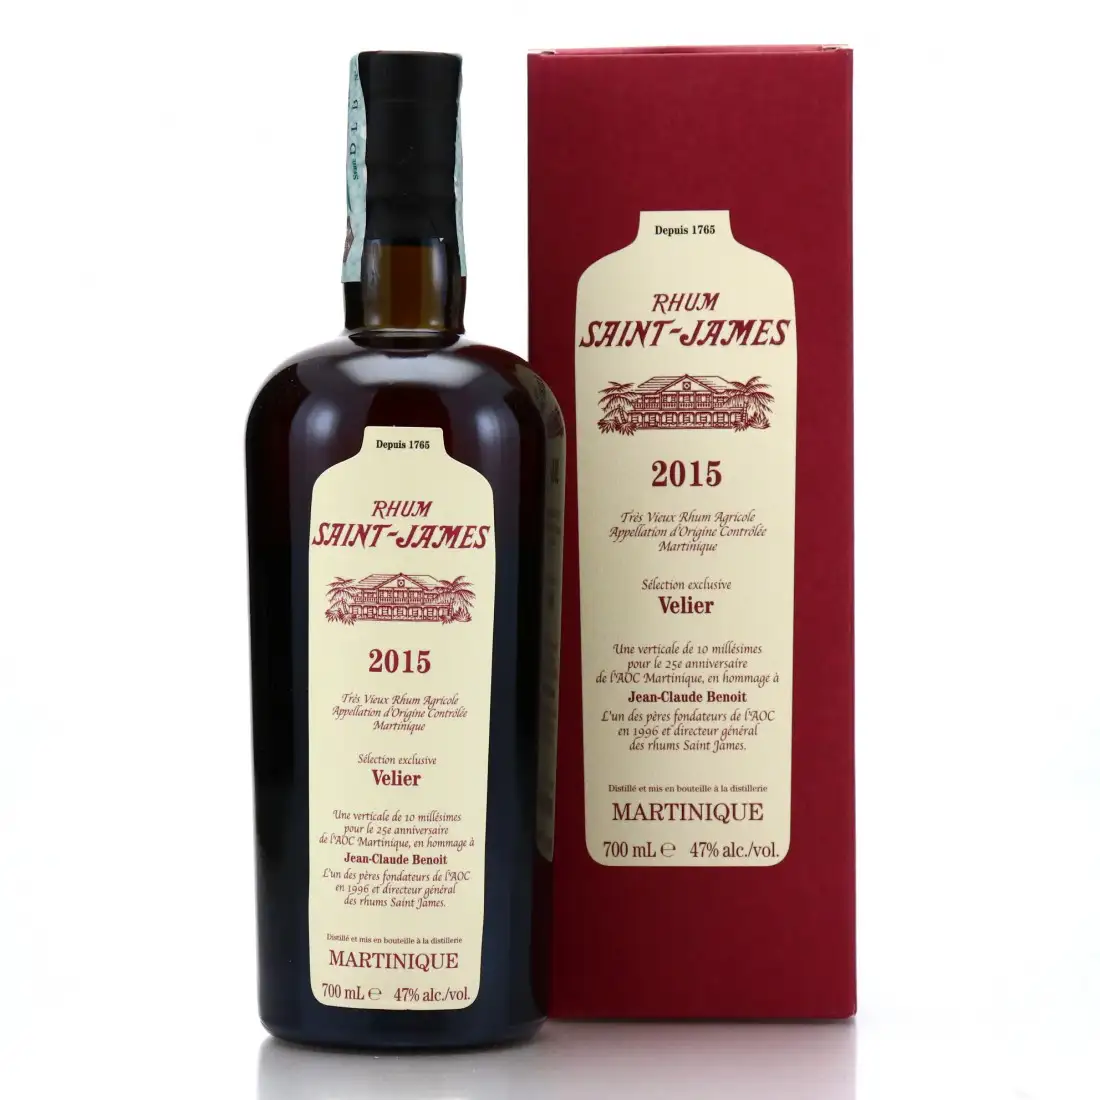 Image of the front of the bottle of the rum Sélection exclusive Velier